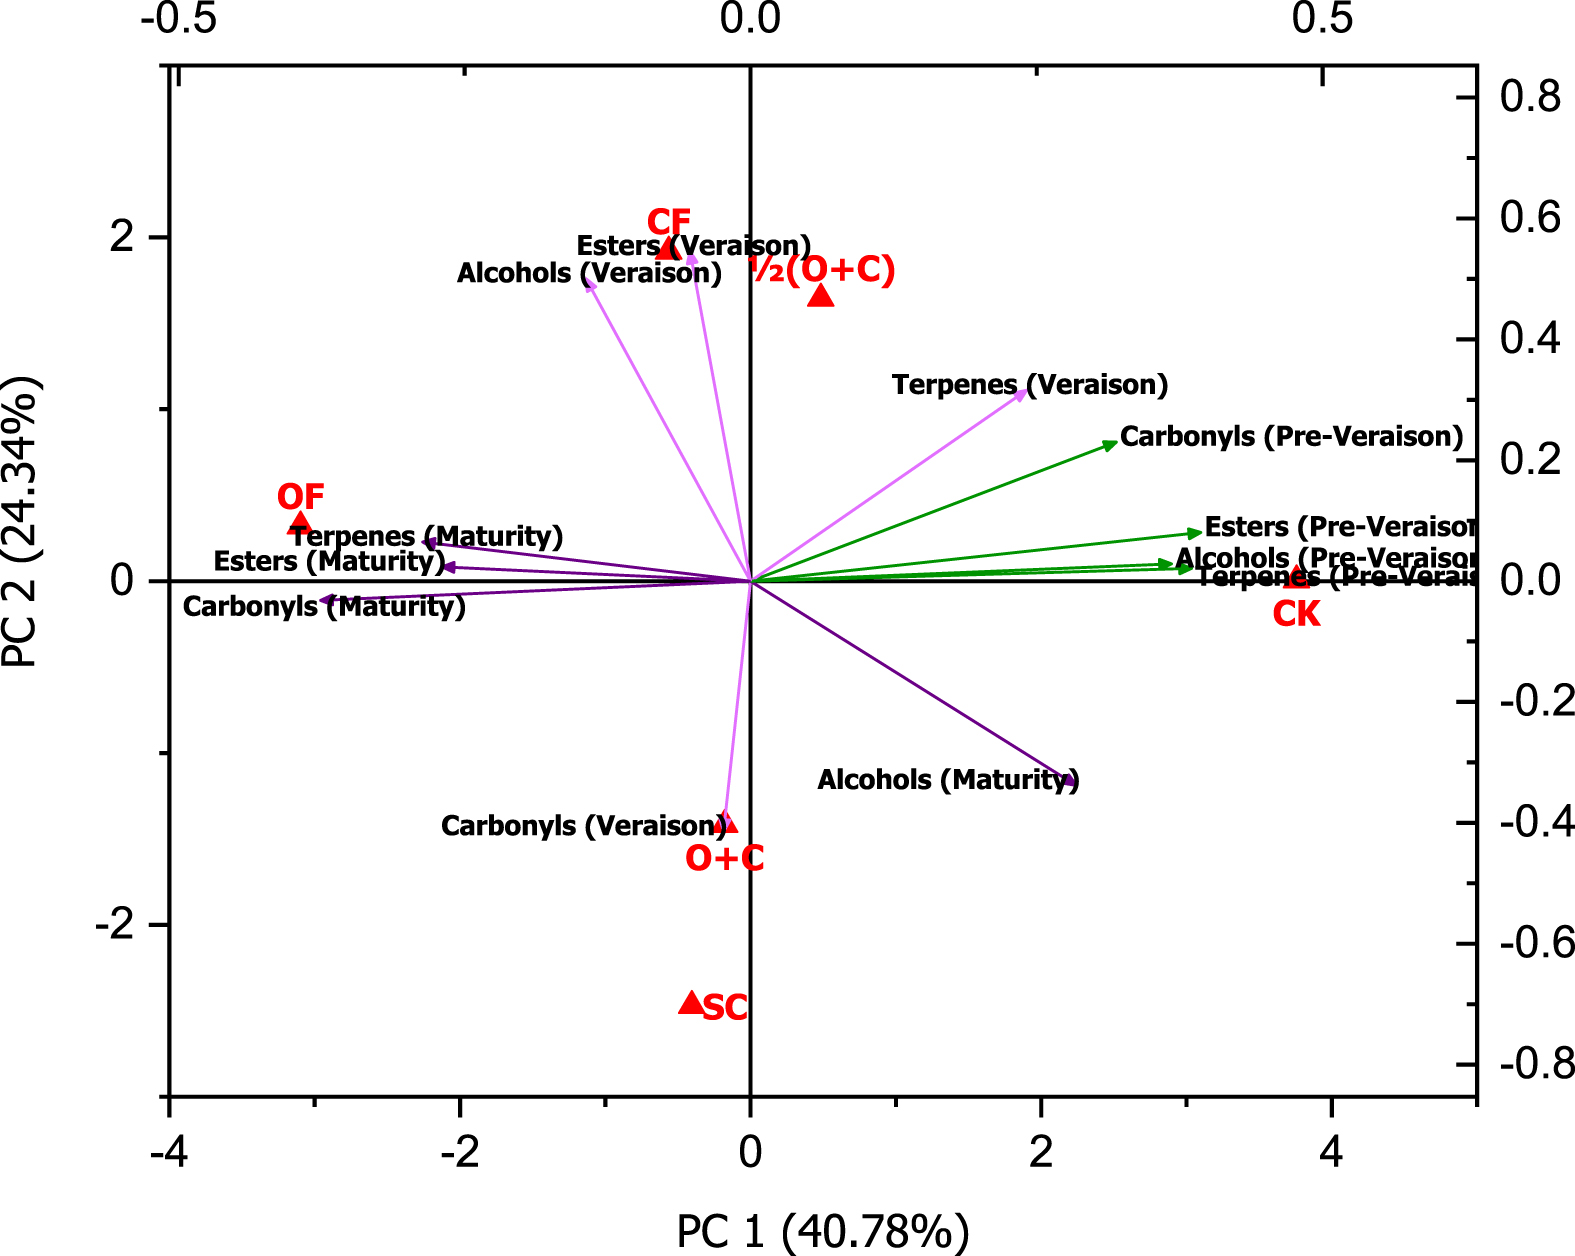 Principal component analysis (PCA) was performed with grape volatile compound classes in Cabernet Sauvignon samples from untreated (CK) and treated grapevines with different fertilization applications during development. CK, samples without any treatment; CF, samples treated with chemical fertilizer; OF, samples treated with organic fertilizer; O + C, samples treated with 50% CF and 50% OF; 1/2(O + C), samples treated with 25% CF and 25% OF; SC, samples treated with soil conditioner.